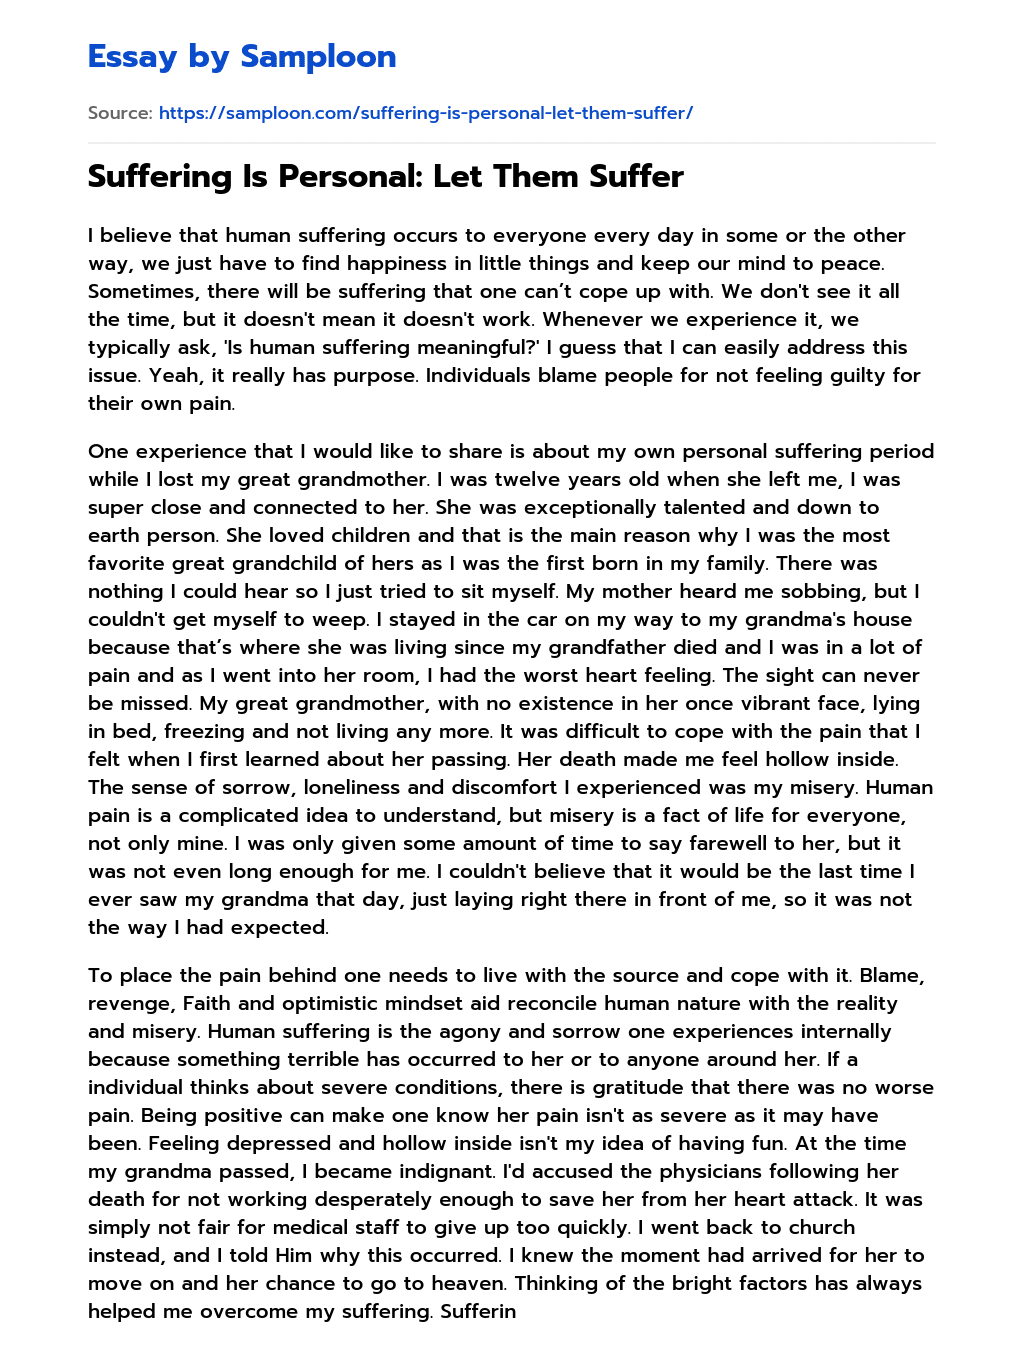 Suffering Is Personal: Let Them Suffer essay